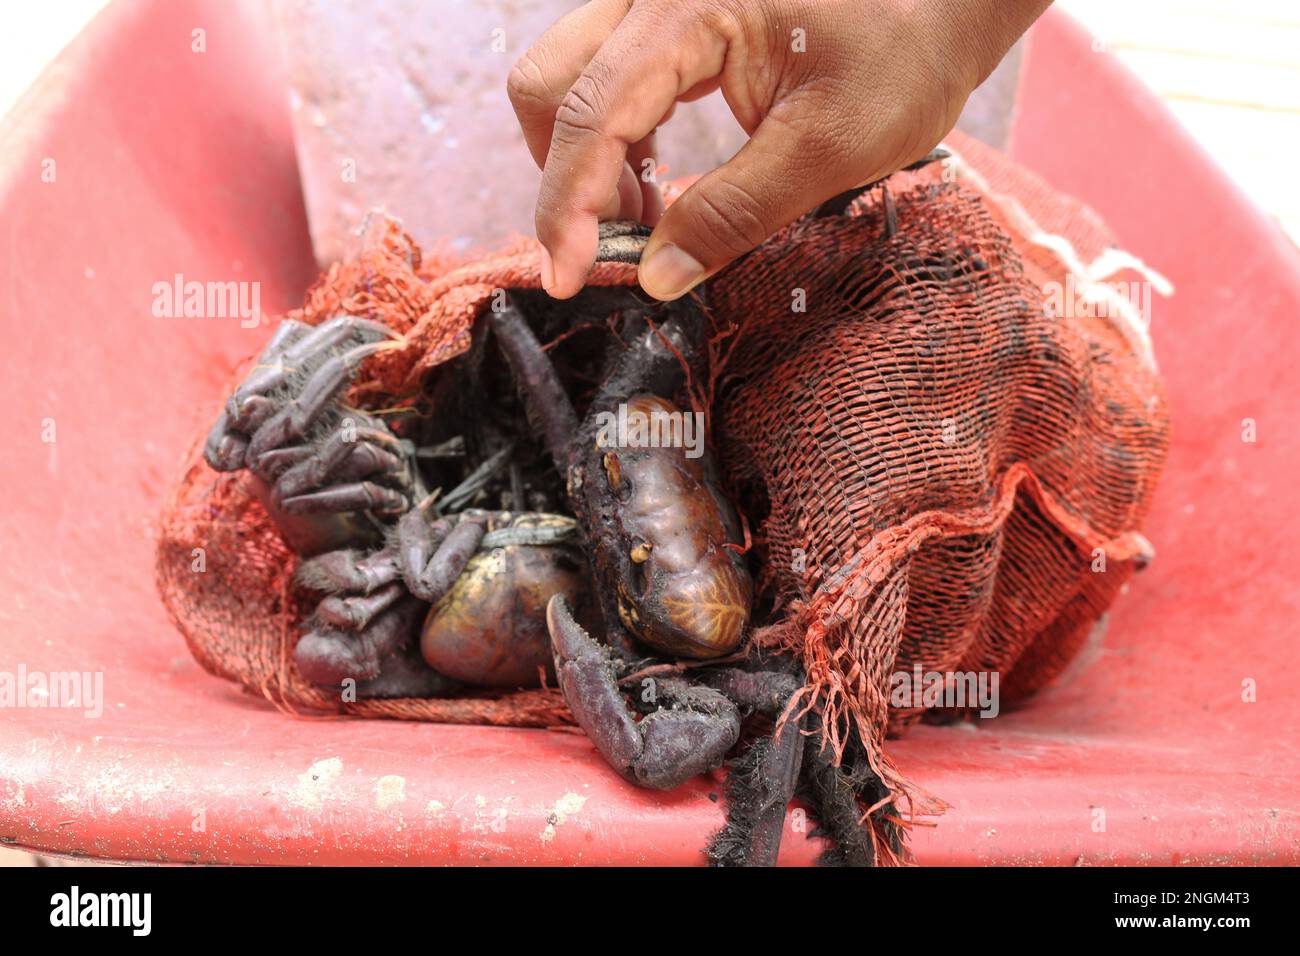 mangrove crab in bag for transport. quite common food in mangrove regions. Stock Photo